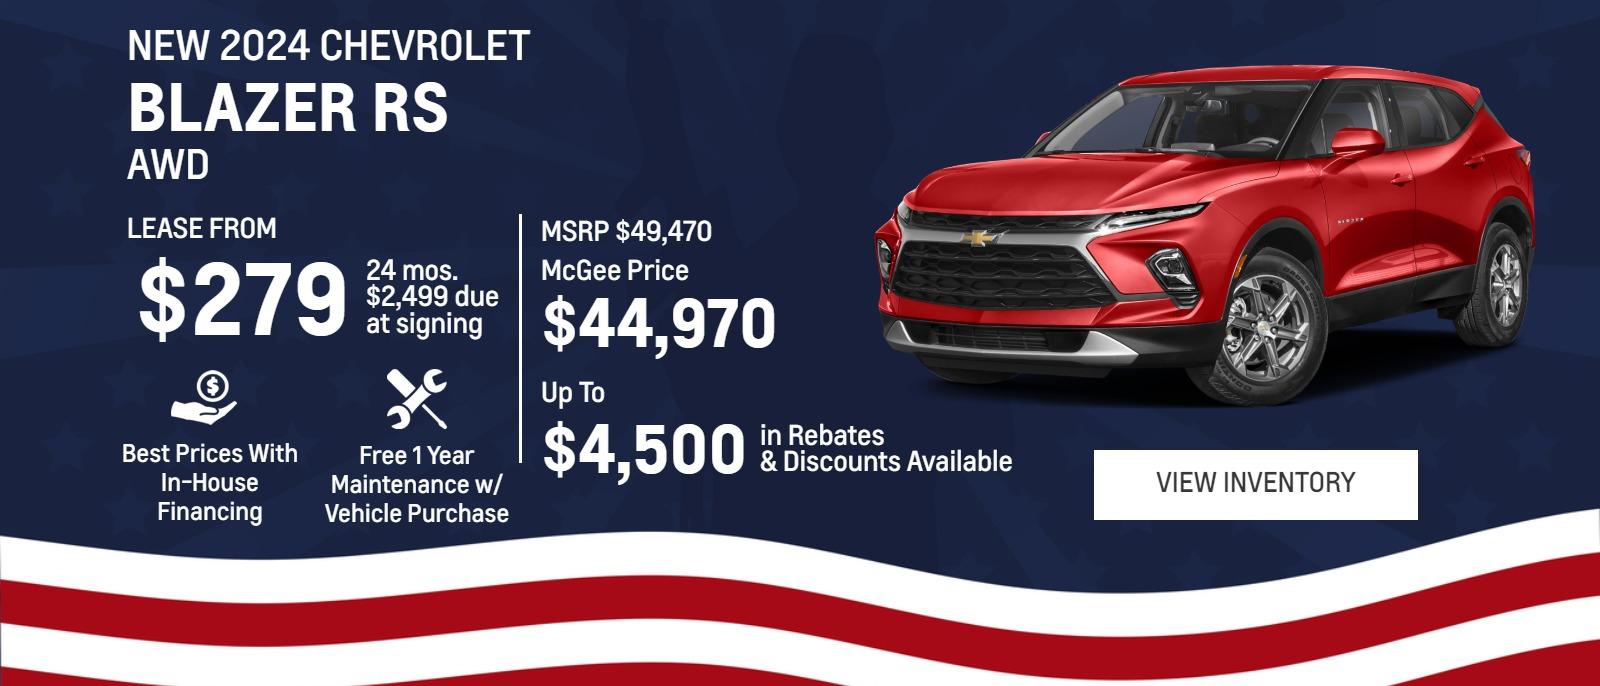 New 2024 Chevrolet
Blazer RS AWD

Lease From
$279
24 mos.
$2,499 due
at signing
49,470
McGee Price
$44,970

Up To
$4,500 (bold larger text)
in Rebates
&Discounts Available

Best Prices With In-House Financing

Free 1 Year Maintenance
w/ Vehicle Purchase